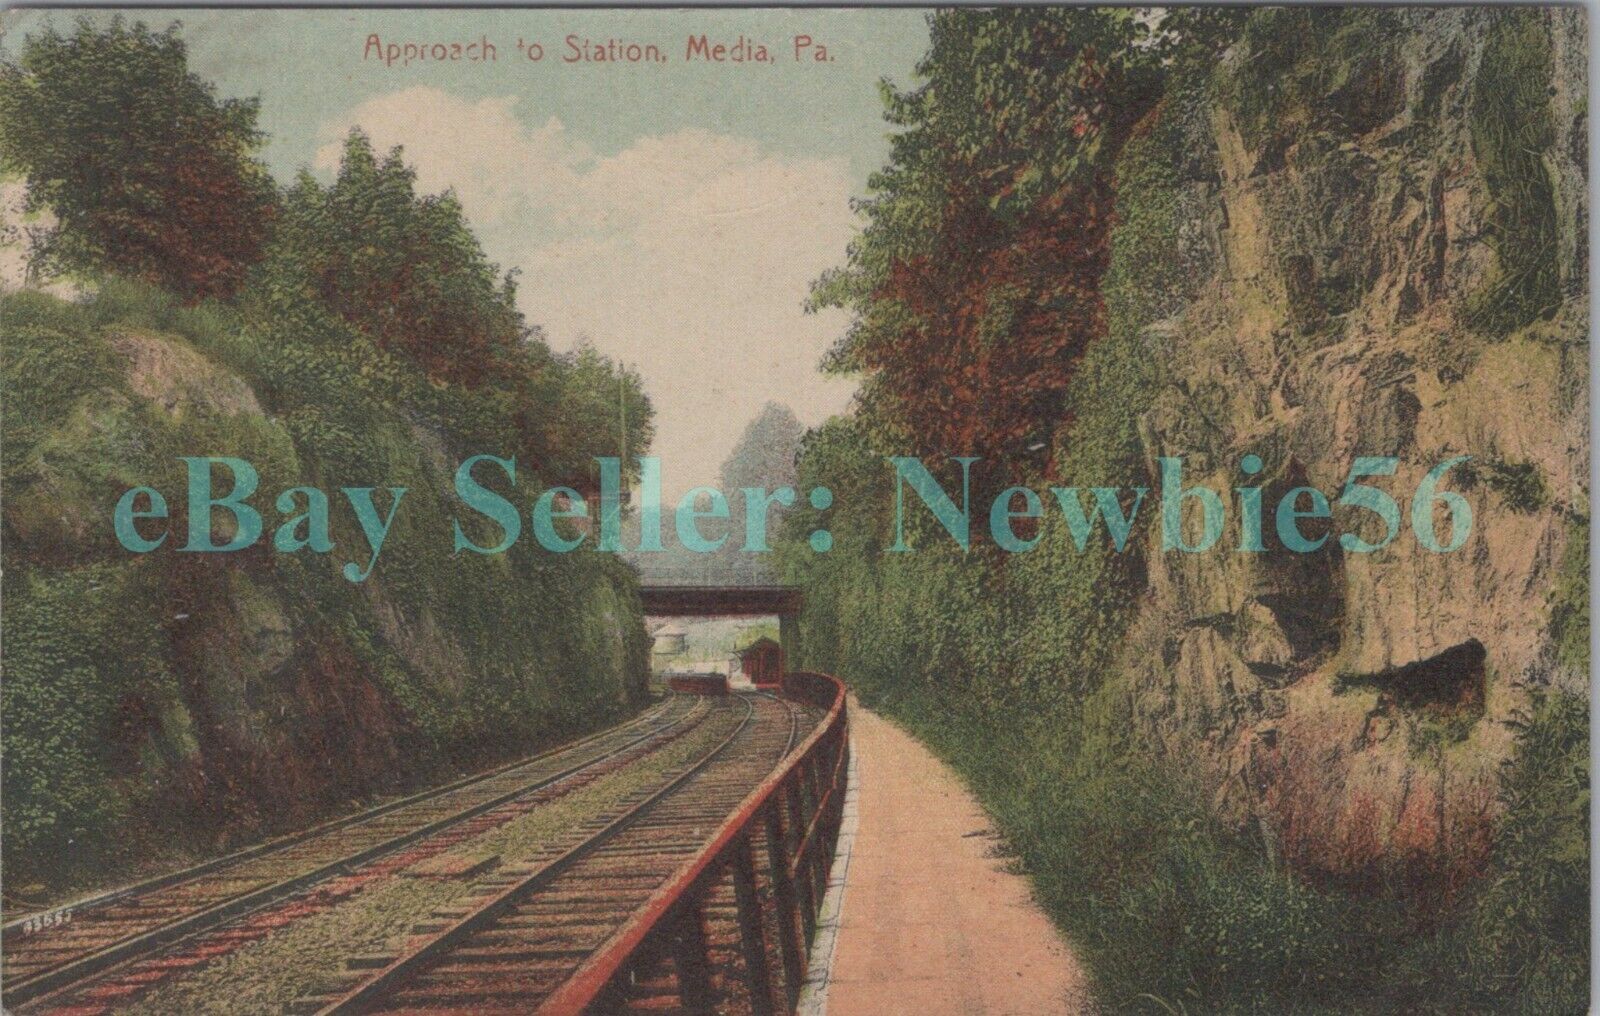 Media PA - APPROACH TO RAILROAD STATION - Postcard Delaware County